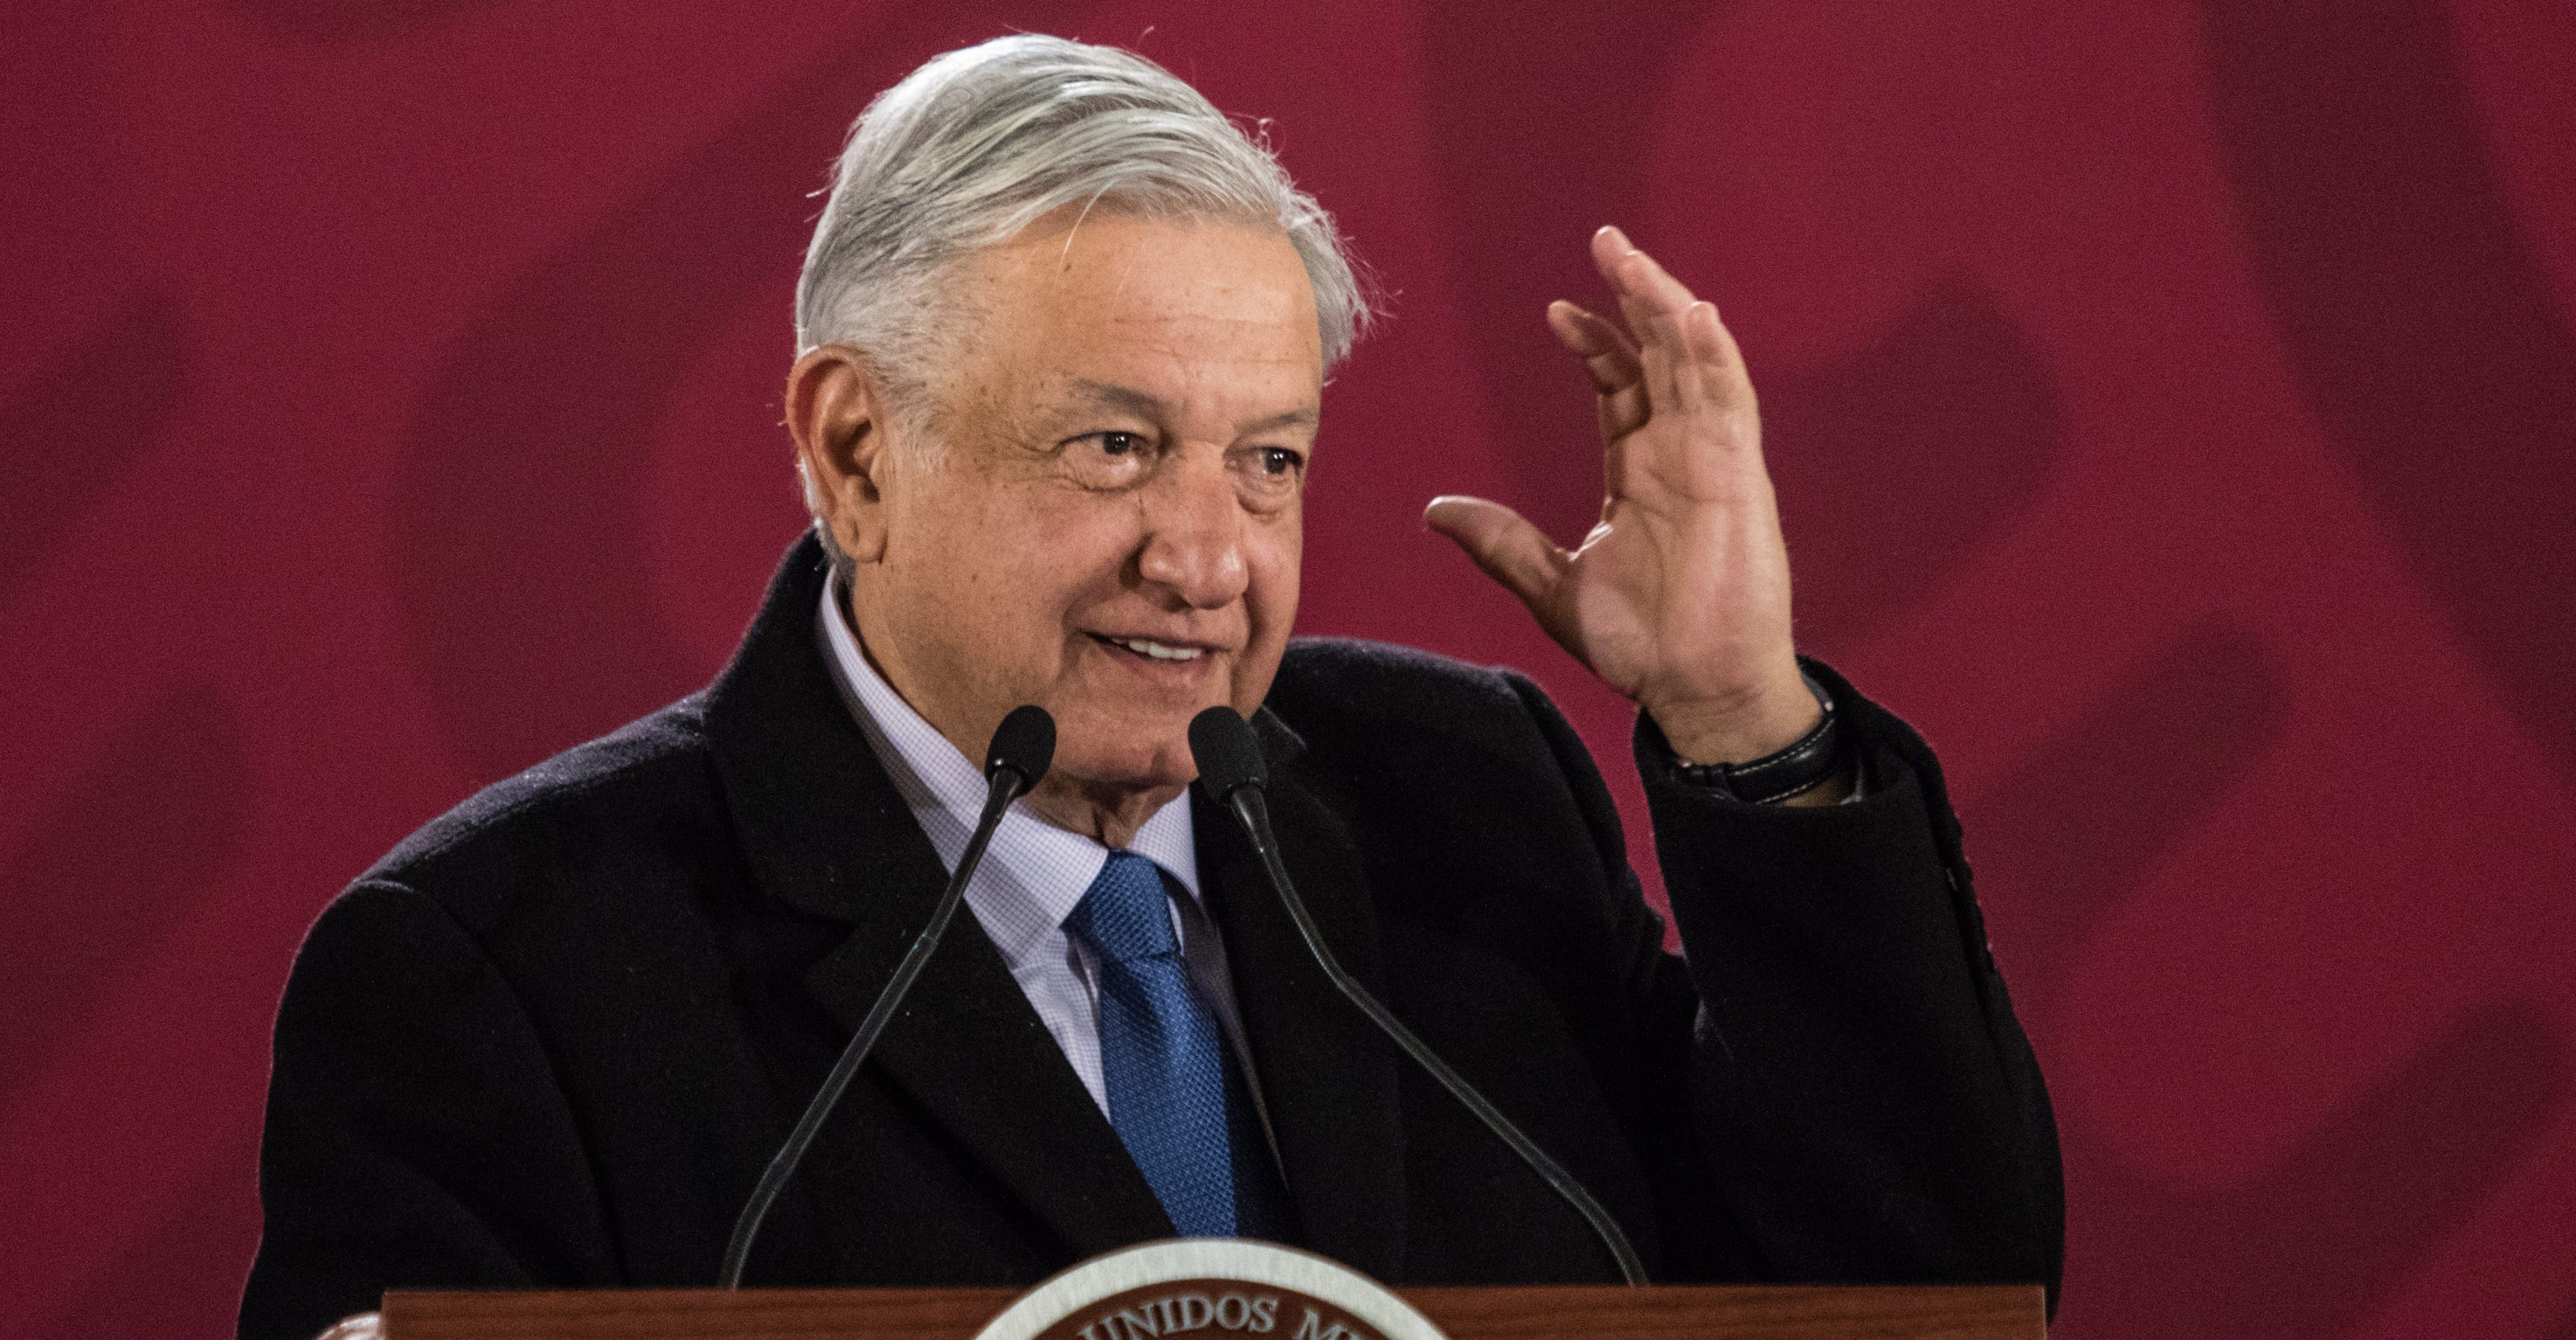 Propaganda that urged support for AMLO was not illegal: TEPJF